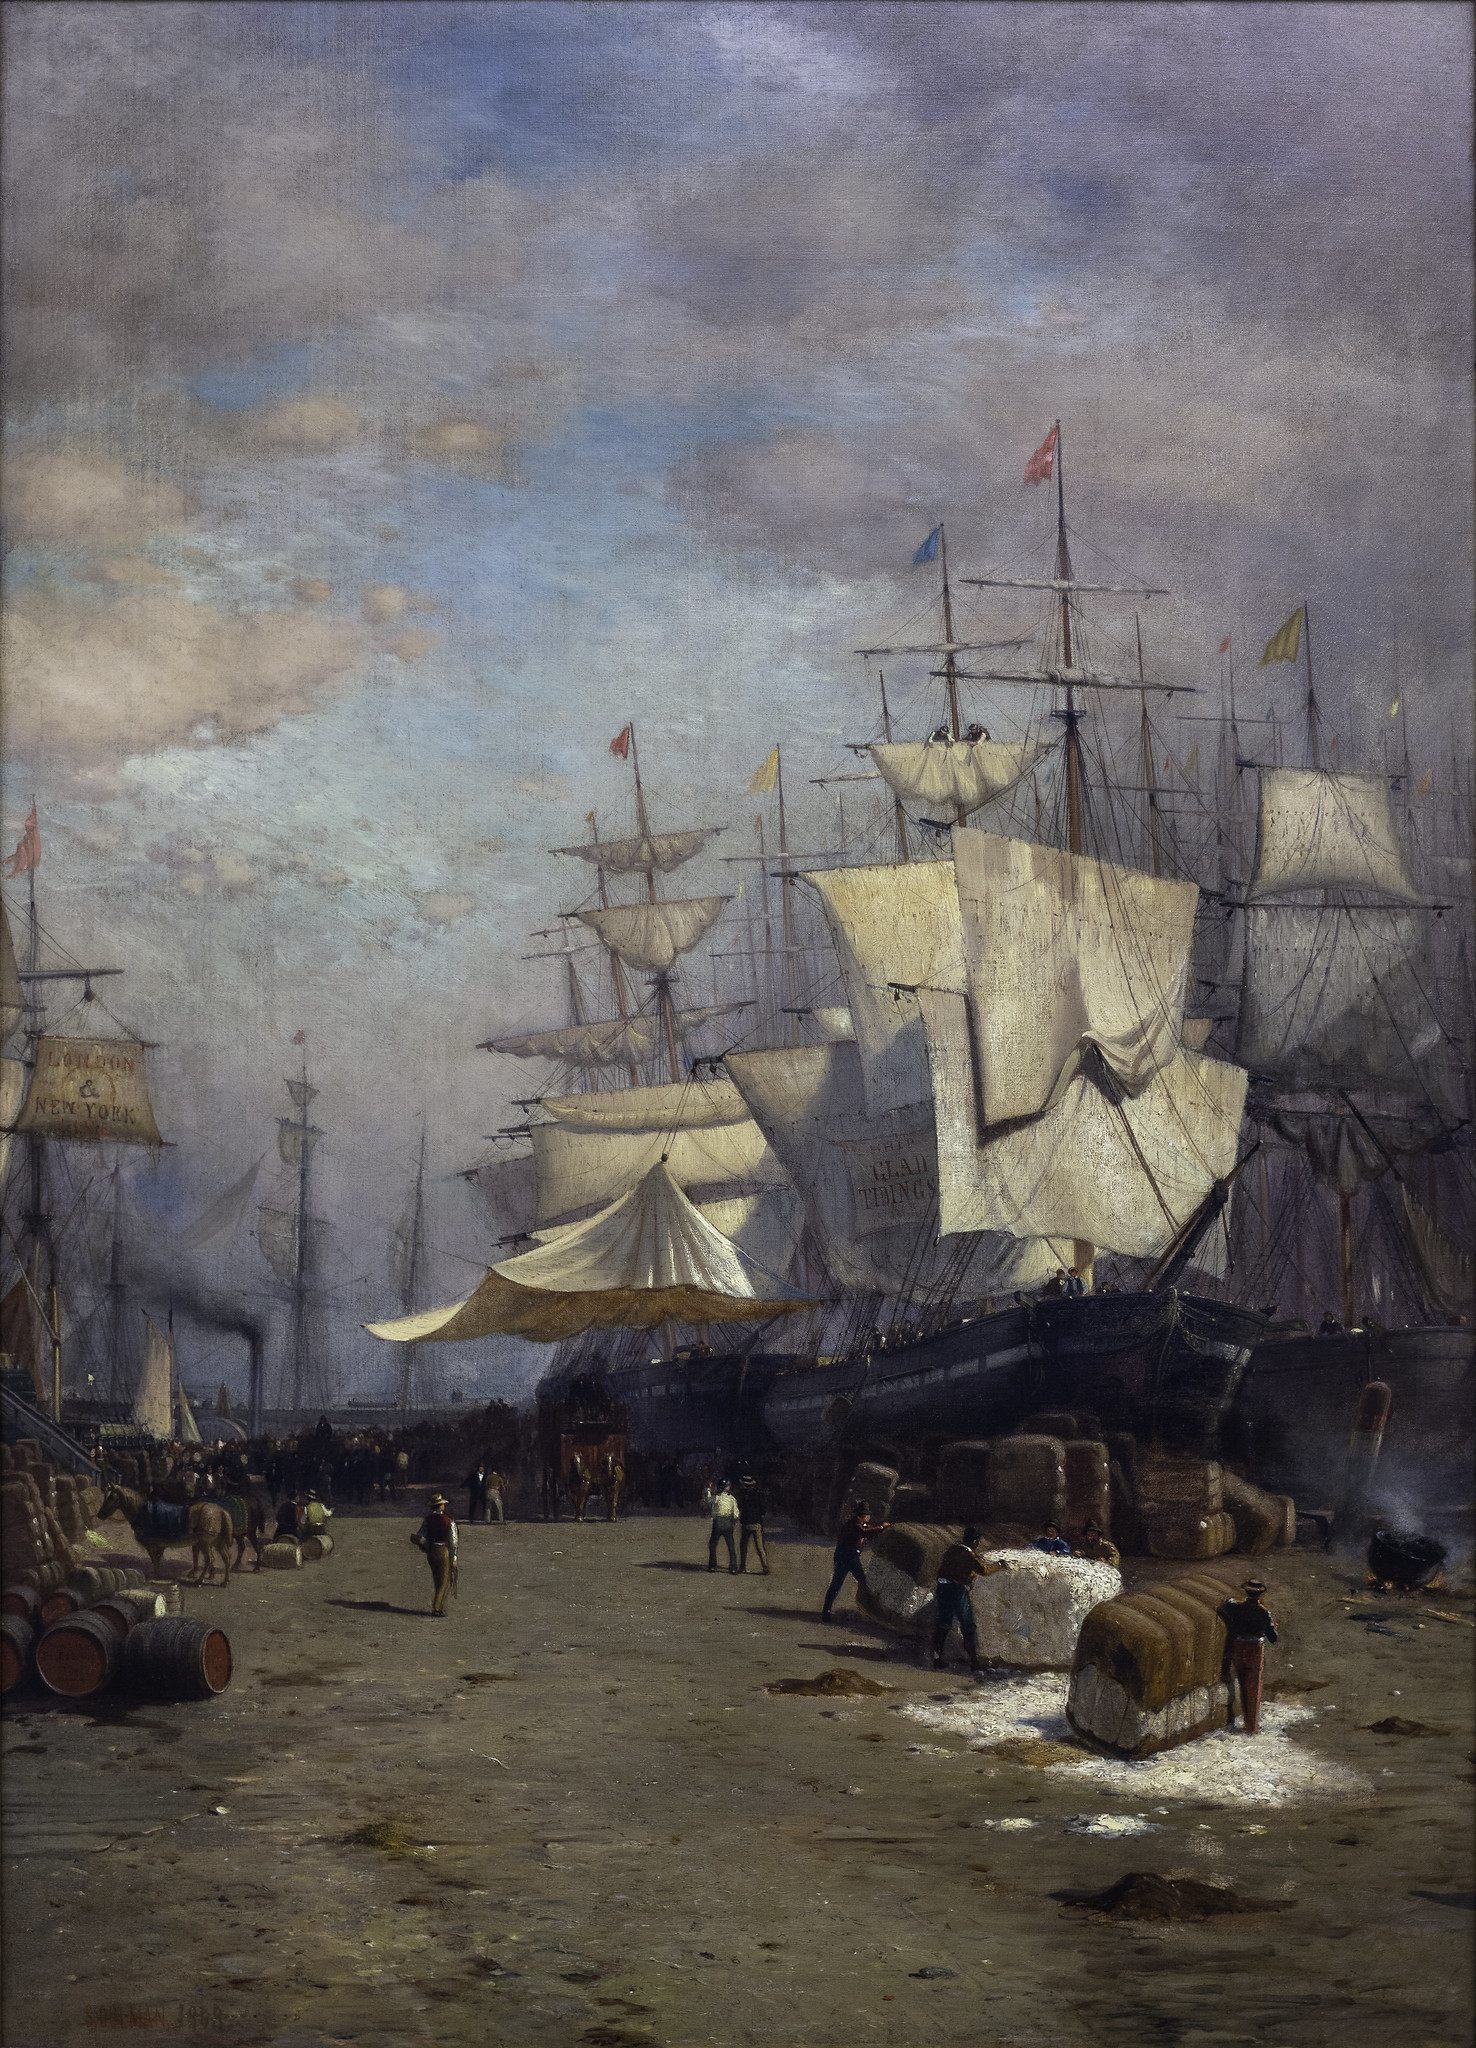 Huge cotton bales can be seen in the right foreground, likely headed for textile mills in the north of England. Samuel Colman, Jr., Ships Unloading, New York, 1868, oil on canvas mounted on board, 105 x 76 cm (The Terra Foundation for American Art, Daniel J. Terra Collection, 1984.4)